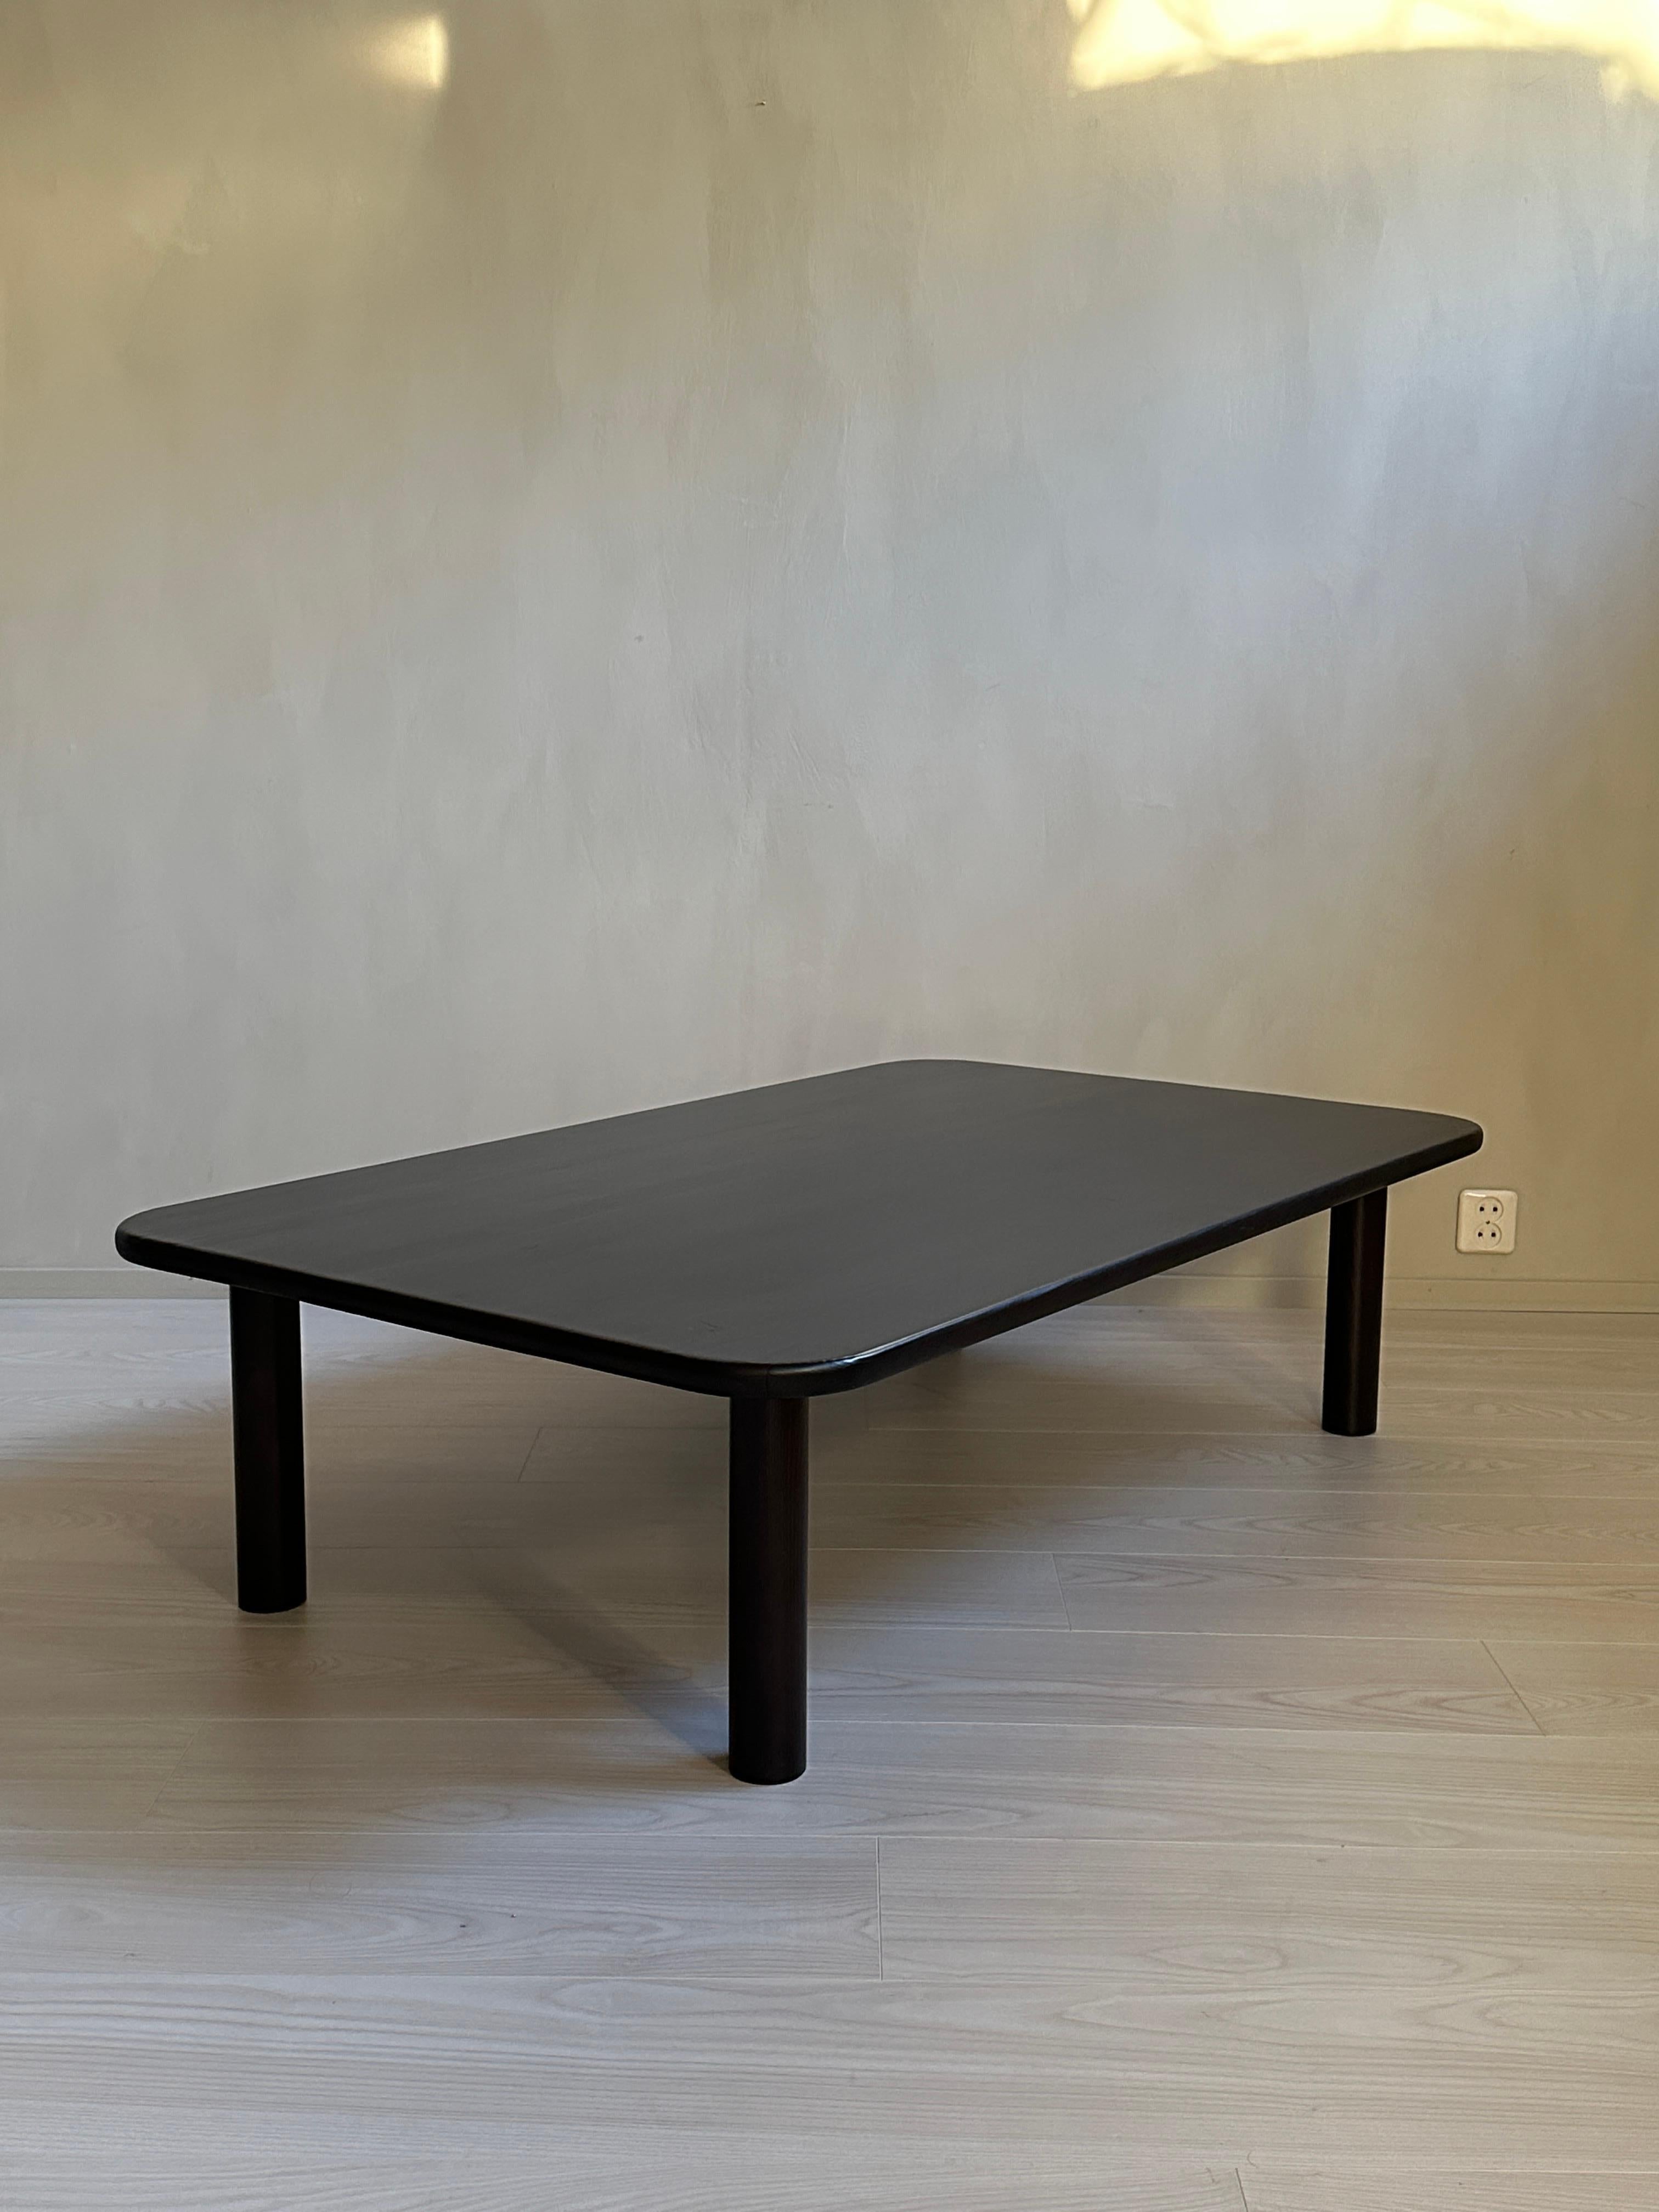 This beautiful Mid-Century Modern ebonized coffee table is a true piece of art and history. Designed in Scandinavia during the 1960s by an unknown designer, it is made from massive pine and features a unique ebonized finish that will suit any living